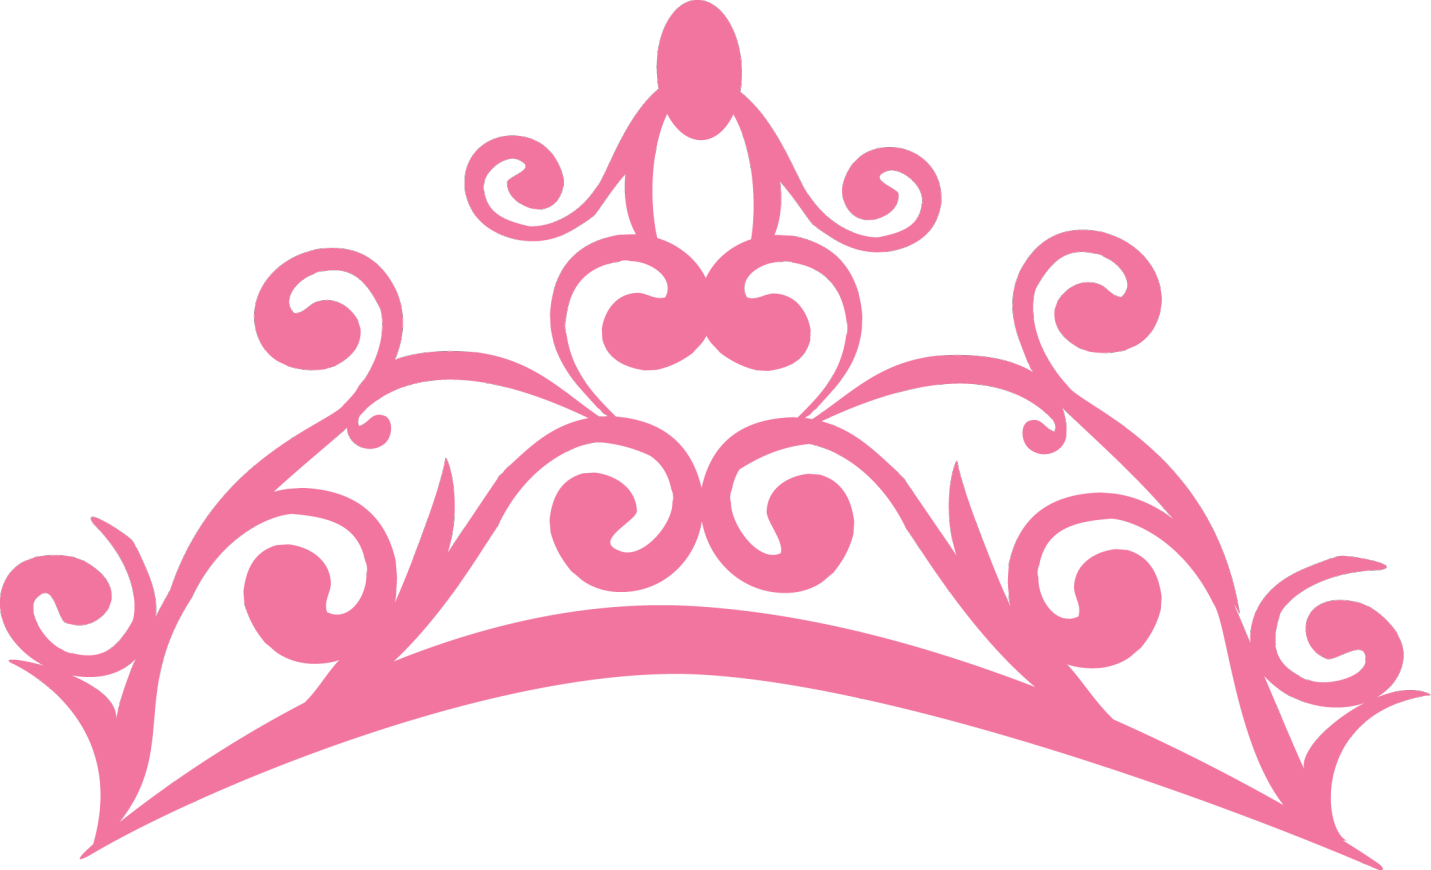 Tiara purple crown clipart free clipart images 2 image